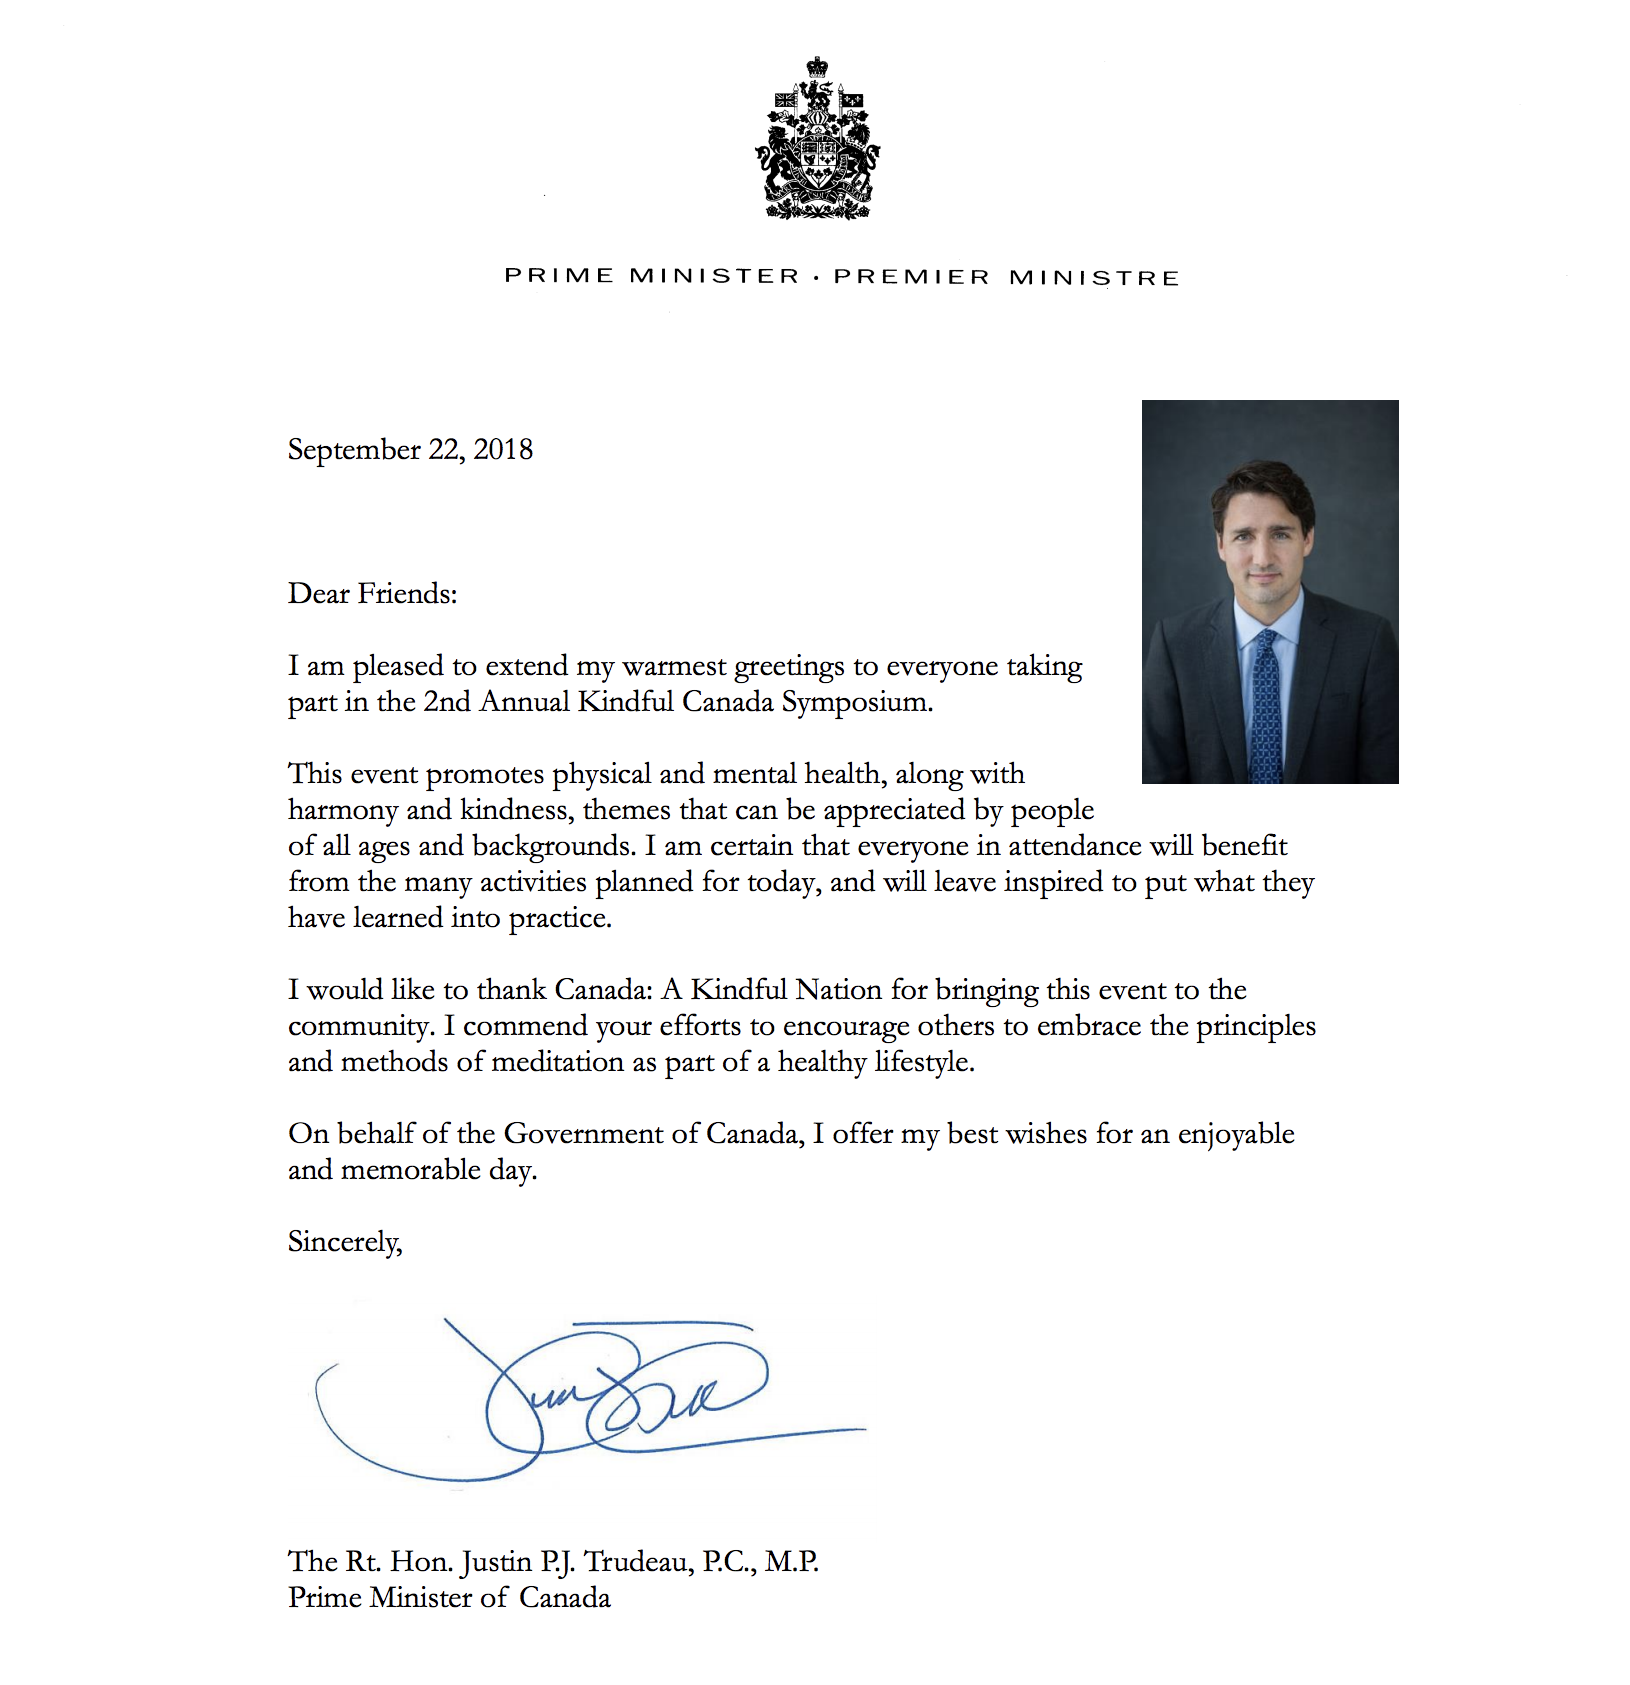 Special Greeting Message from the Right Honorable Justin Trudeau, the Prime Minister of Canada